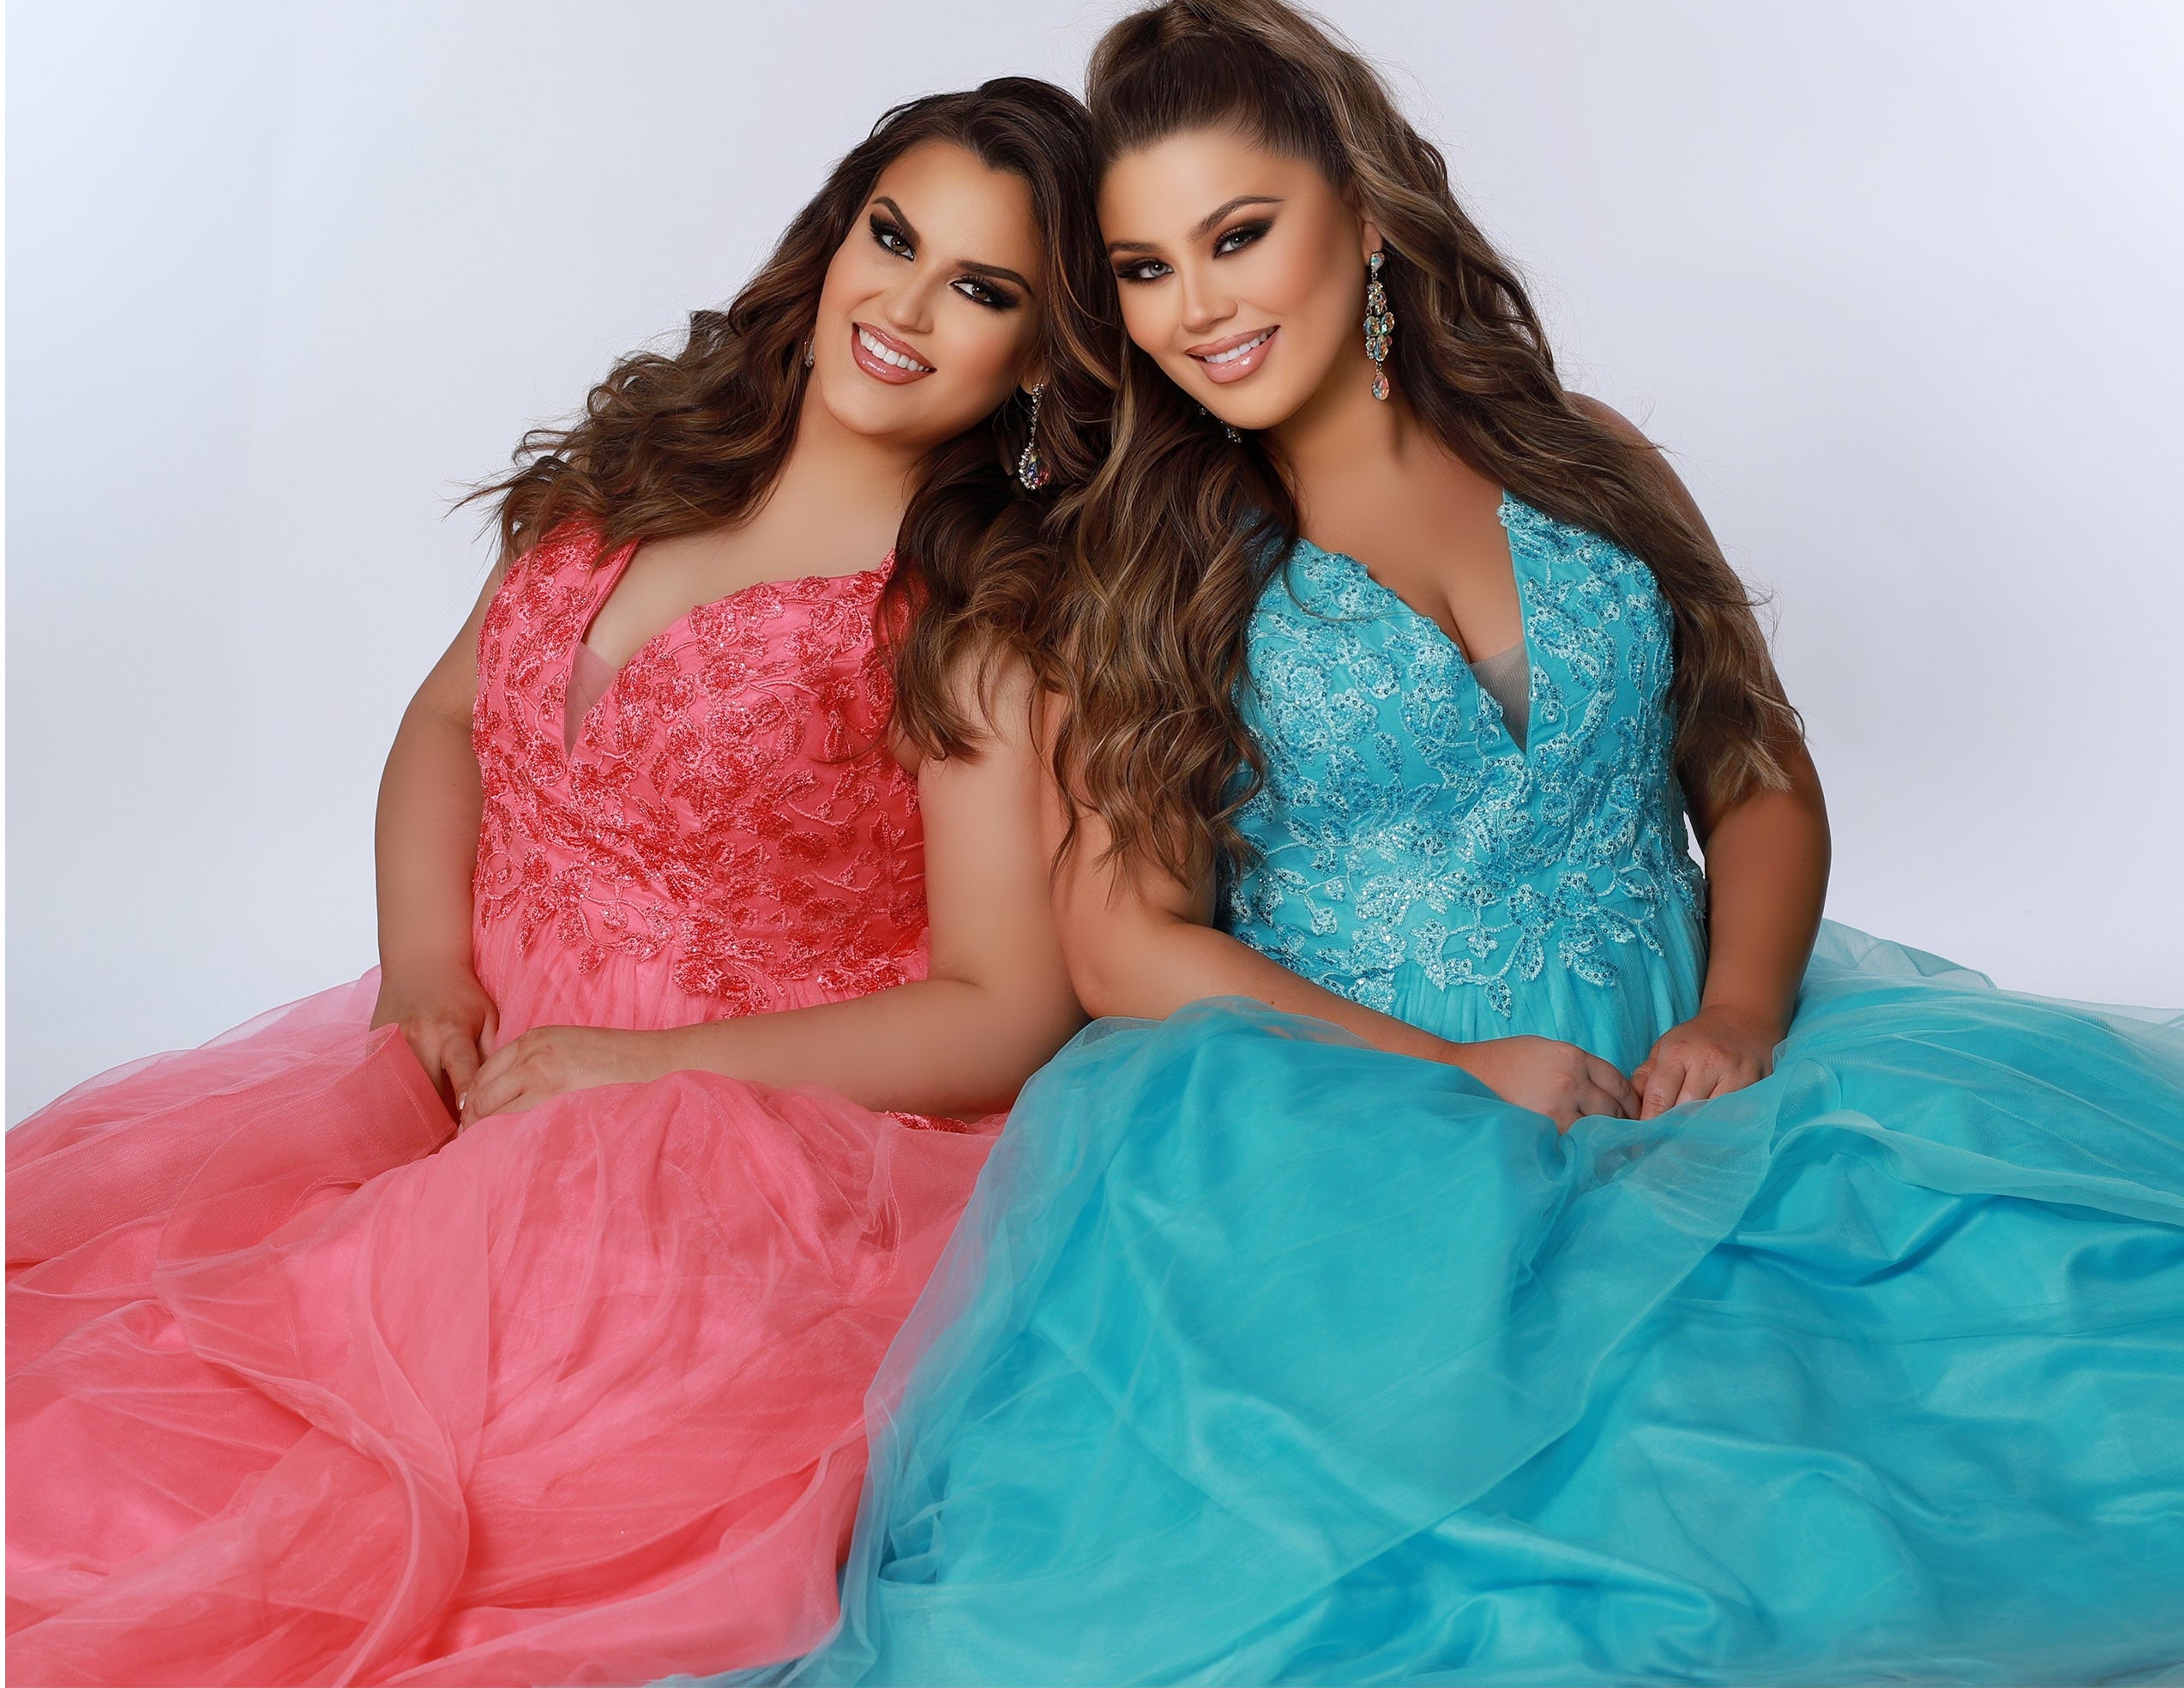 Sydney’s Closet SC7347. Tulle ballgown with lace appliques on bodice. Offered in light blue, coral, light pink and lilac purple. Has a V-neckline, bra-friendly straps and a natural waistline. A tried tulle skirt with horsehair hem. Invisible back zipper